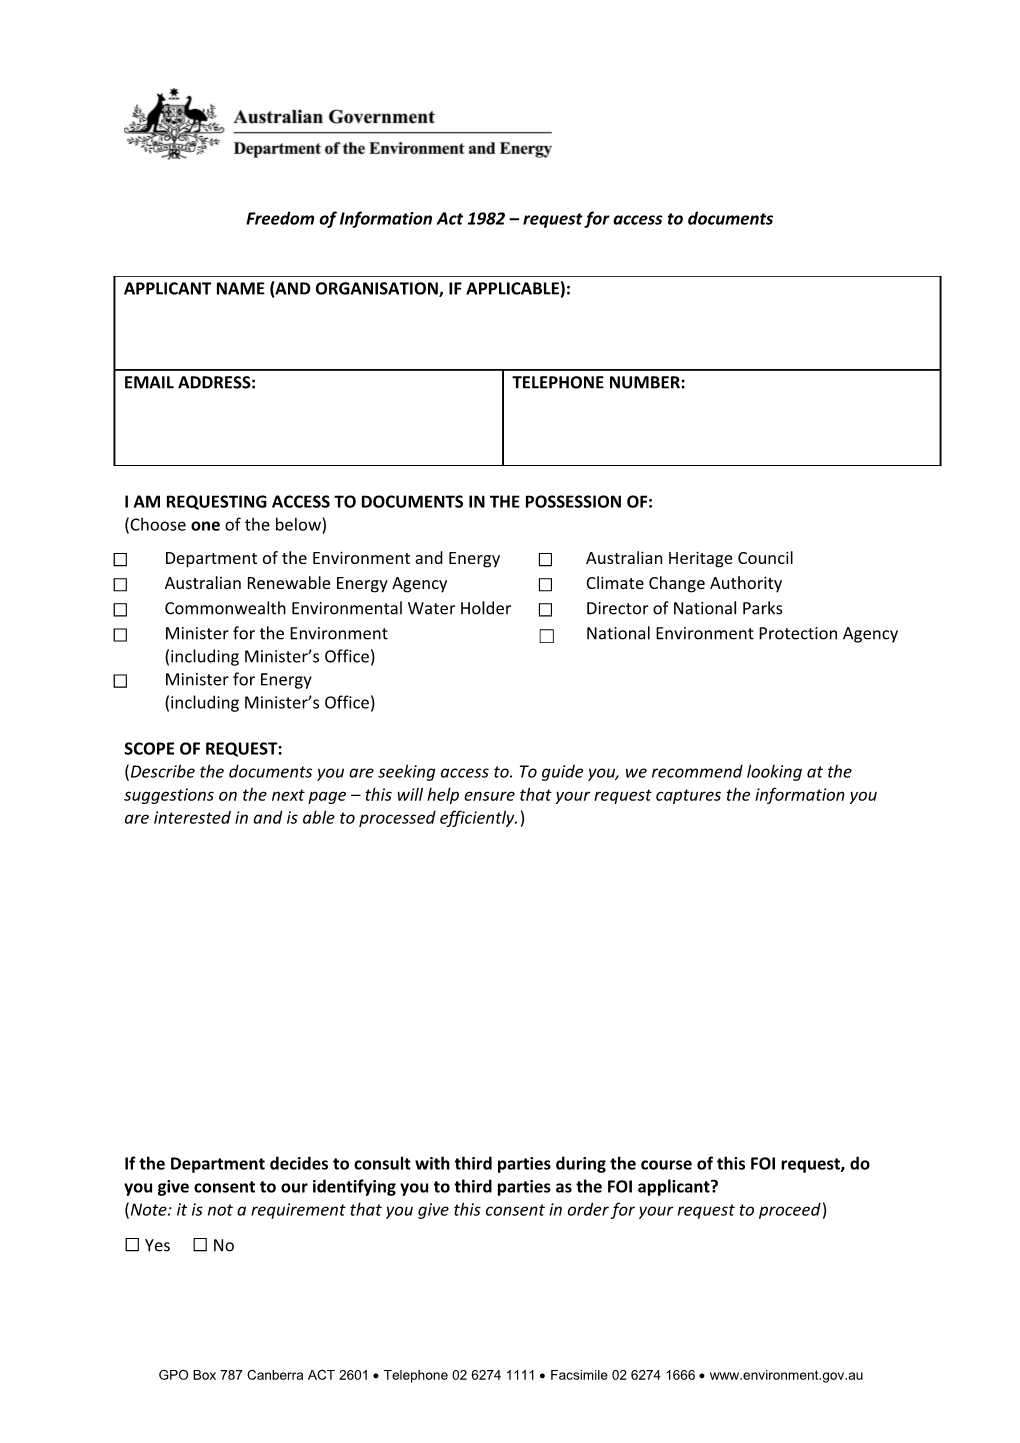 FOI Application Form - Department of the Environment and Energy